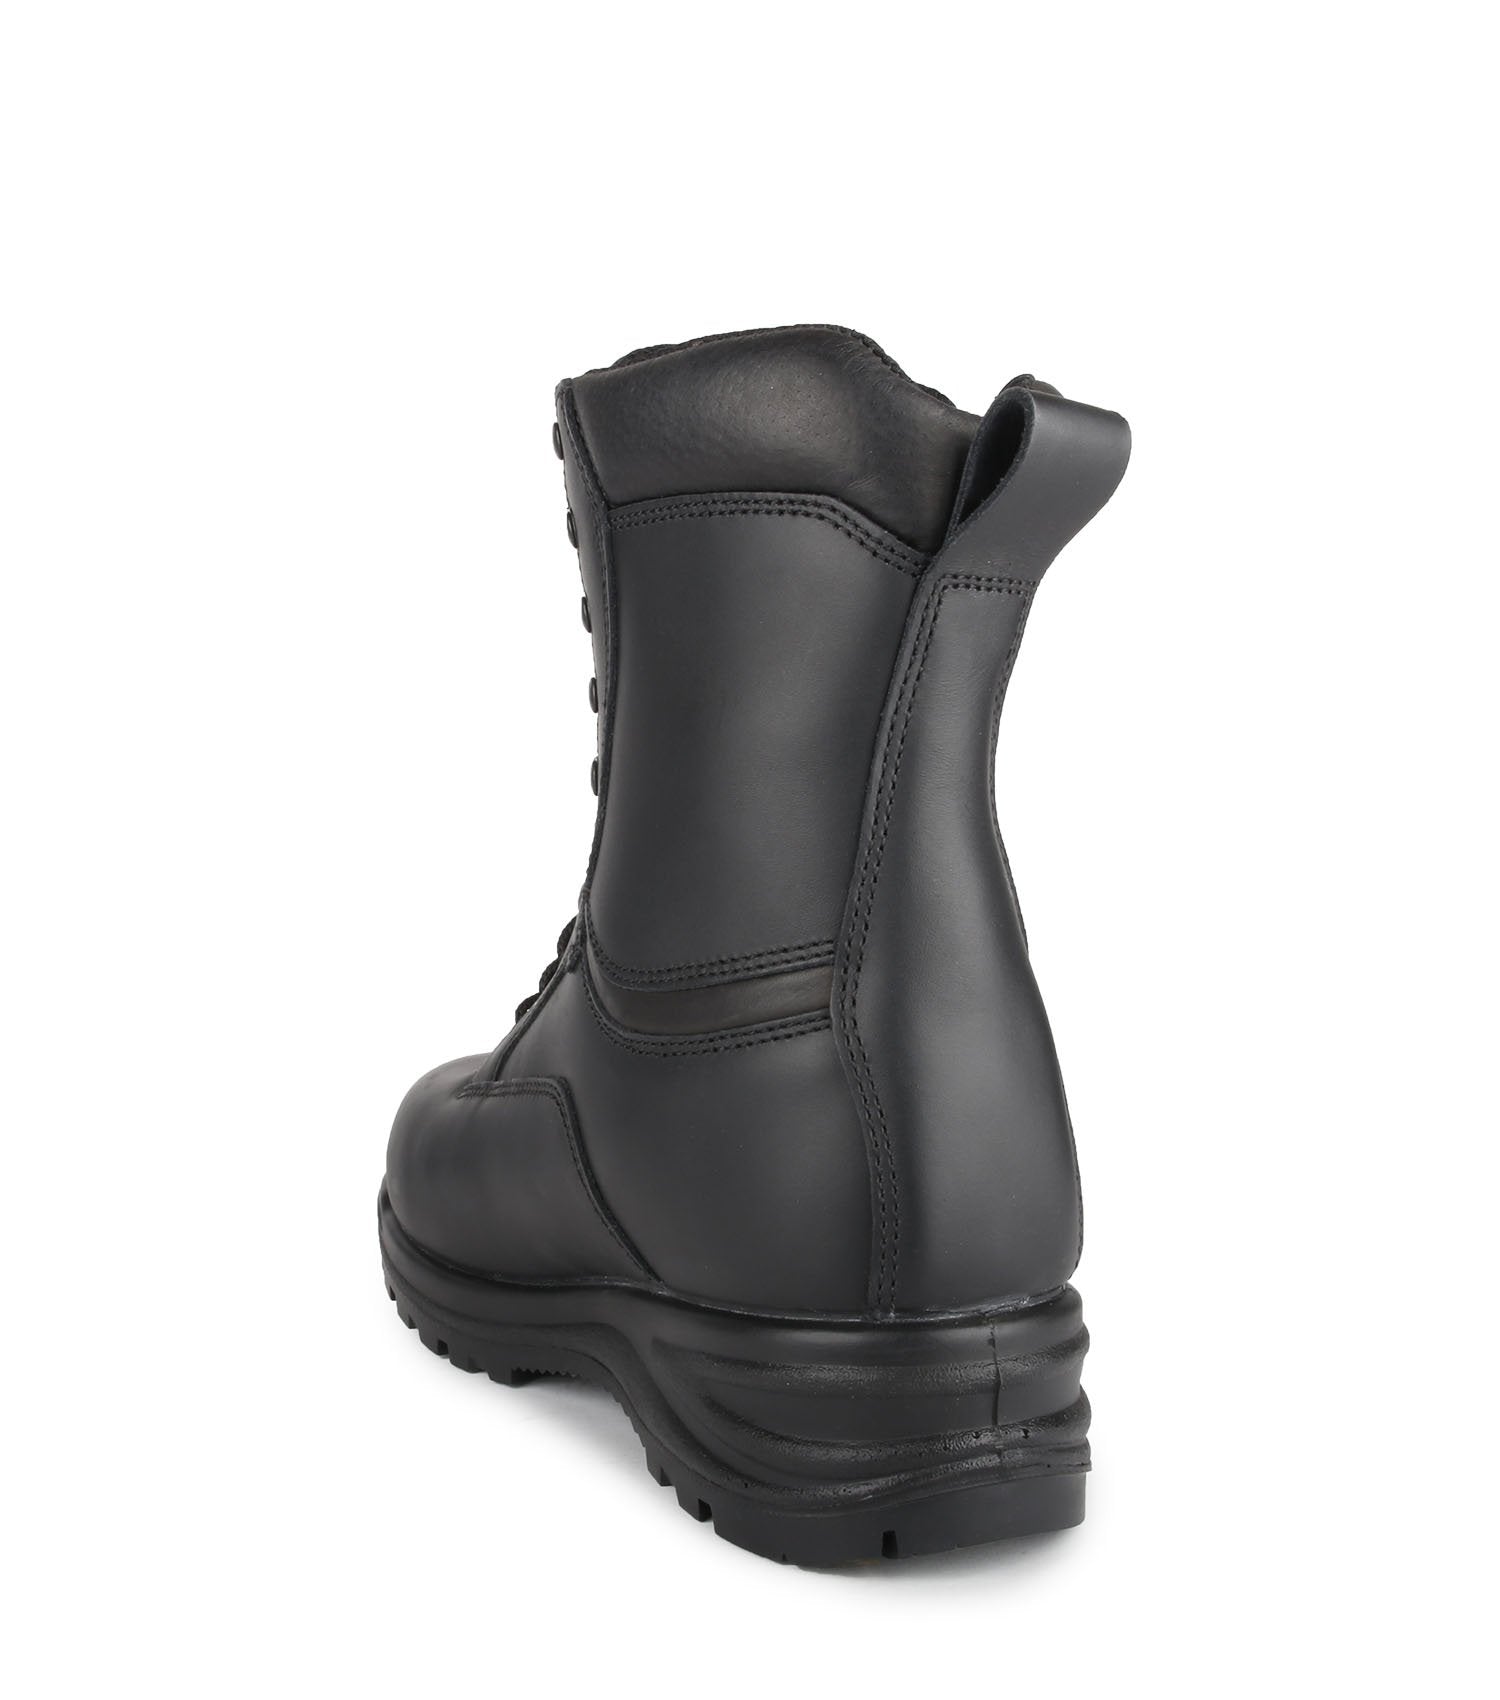 STC ER 8" Winter Tactical Boots  | Black | Sizes 3.5 - 14 Work Boots - Cleanflow